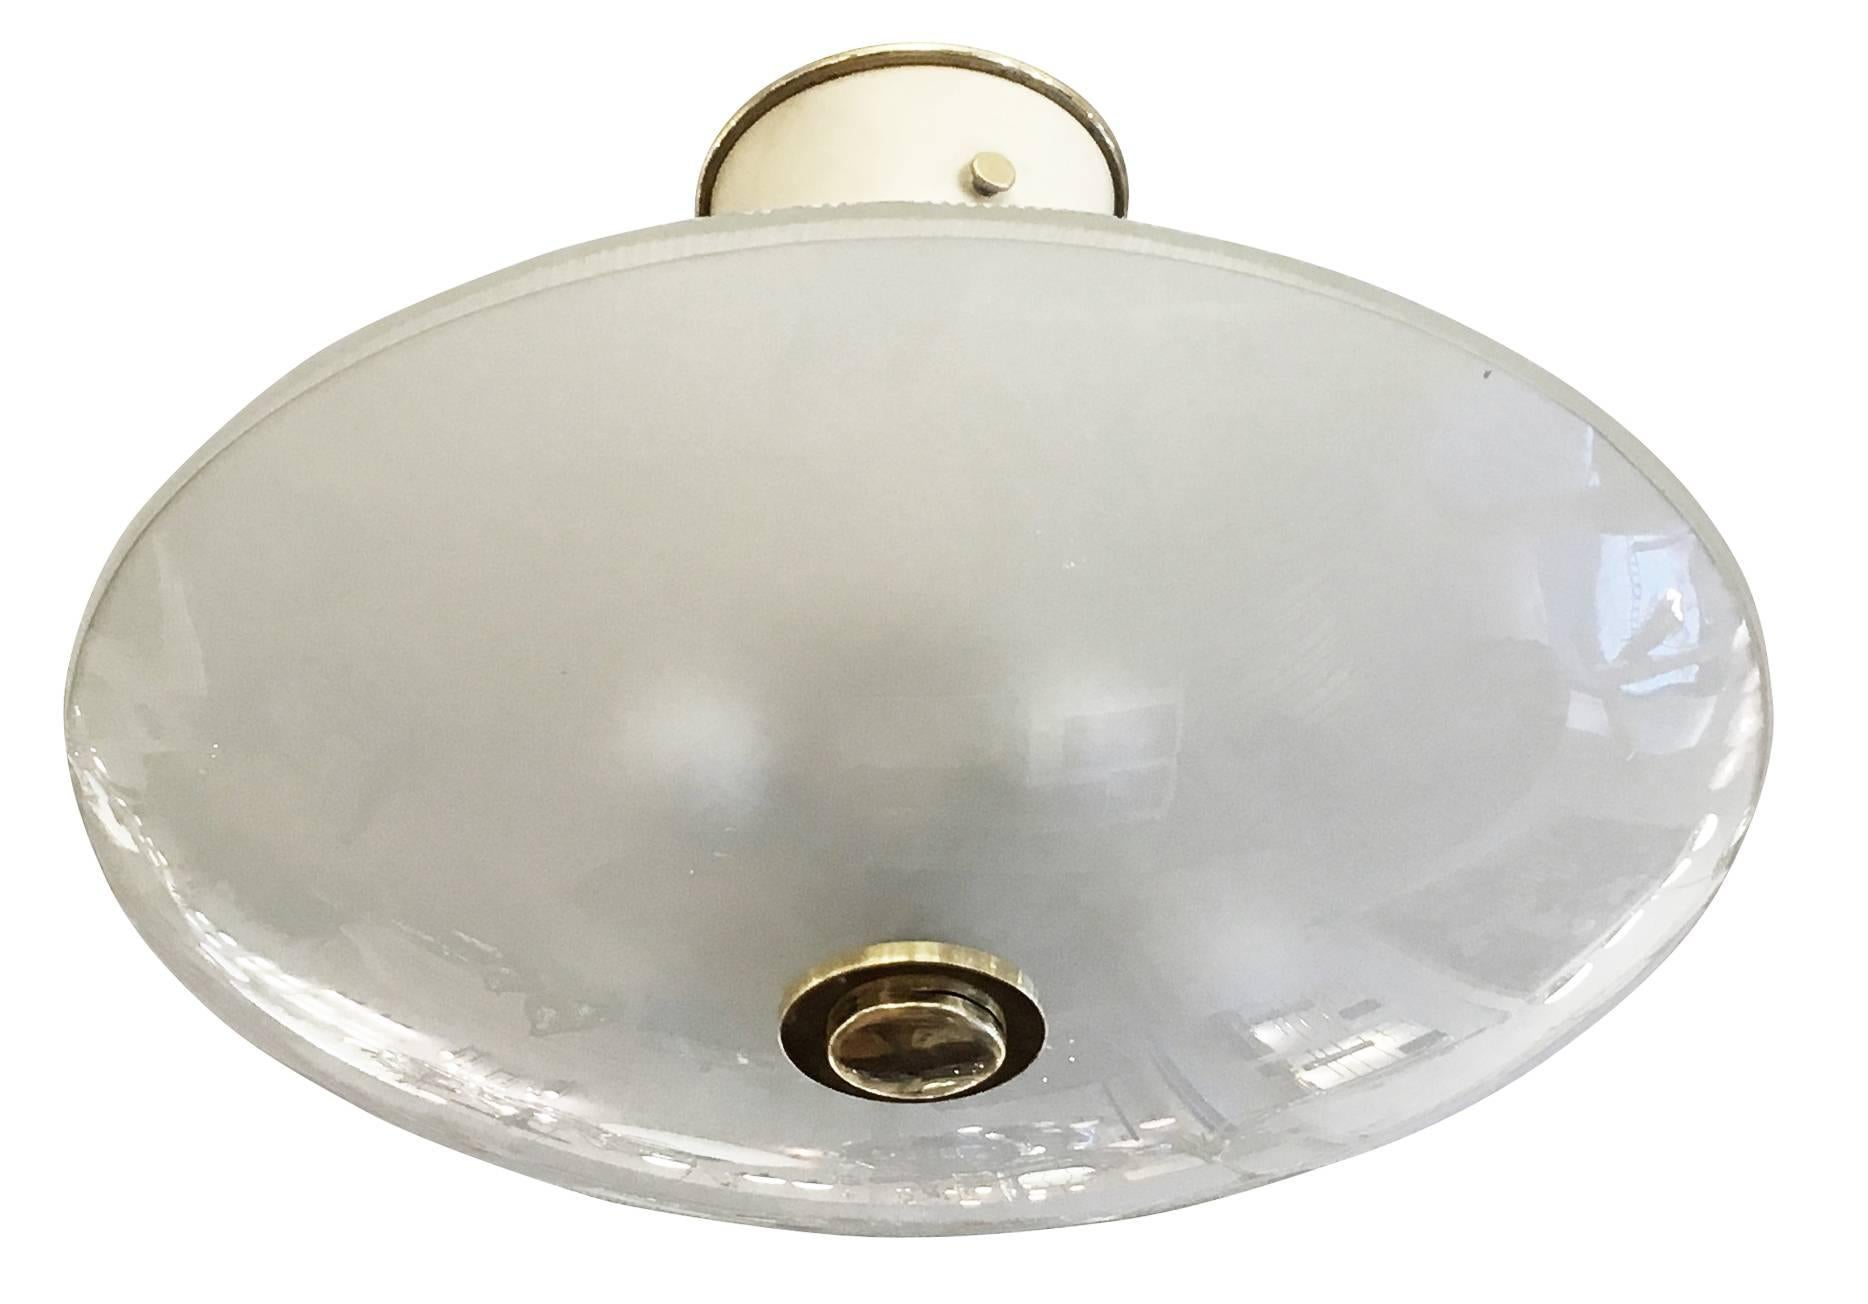 Charming glass fixture reminiscent of some Fontana Arte designs in the shape of an elliptical with on top a white lacquered conical ceiling mount. The body of the chandelier is composed by two glass dishes; the bottom one is frosted smooth while the